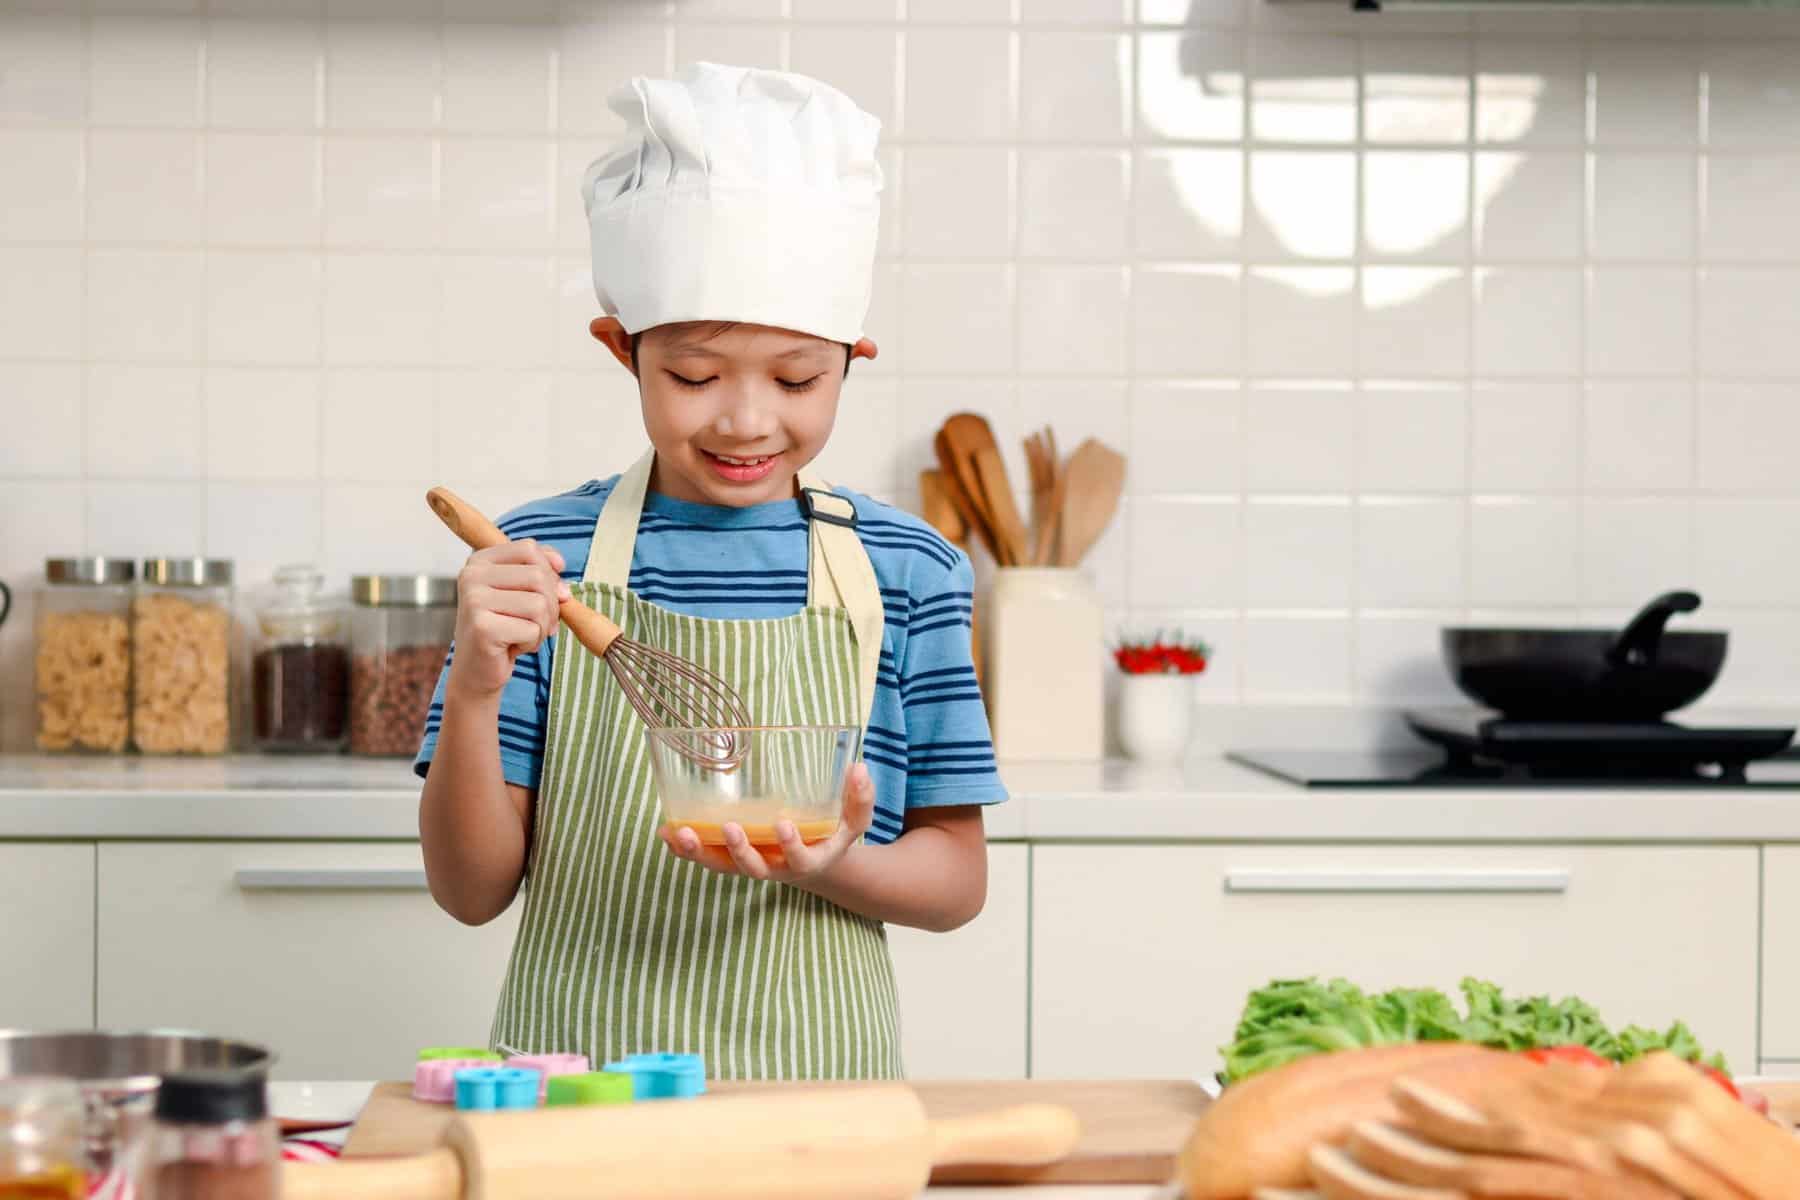 Little boy wearing a chef's hat holding a bowl